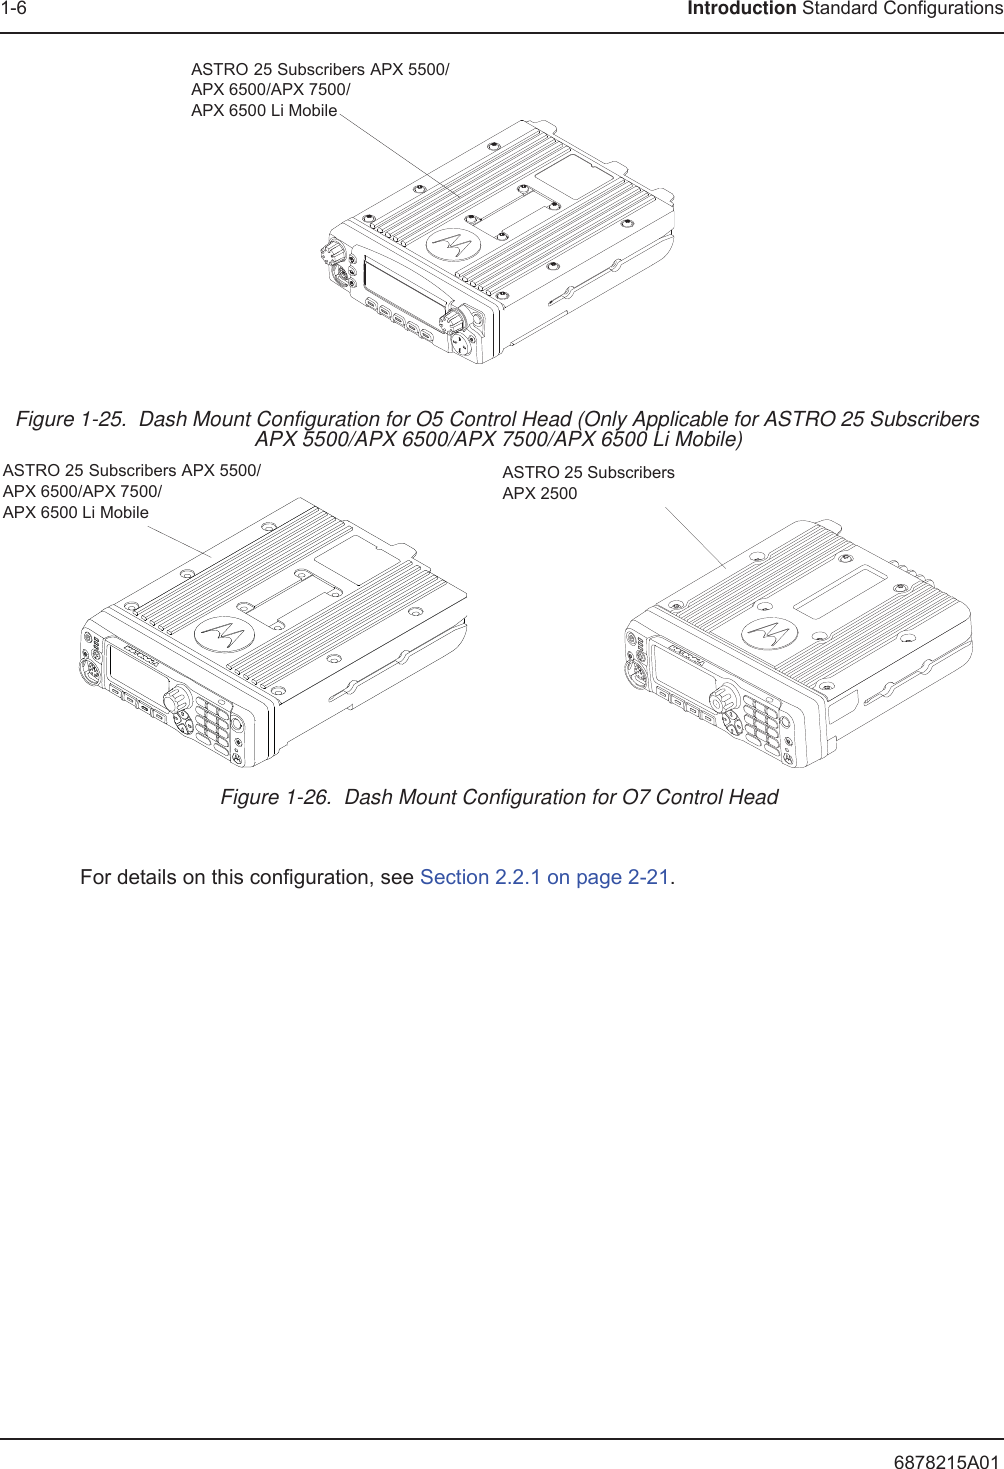 6878215A011-6 Introduction Standard ConfigurationsFor details on this configuration, see Section 2.2.1 on page 2-21.Figure 1-25.  Dash Mount Configuration for O5 Control Head (Only Applicable for ASTRO 25 Subscribers APX 5500/APX 6500/APX 7500/APX 6500 Li Mobile)Figure 1-26.  Dash Mount Configuration for O7 Control HeadASTRO 25 Subscribers APX 5500/APX 6500/APX 7500/APX 6500 Li MobileASTRO 25 Subscribers APX 2500ASTRO 25 Subscribers APX 5500/APX 6500/APX 7500/APX 6500 Li Mobile